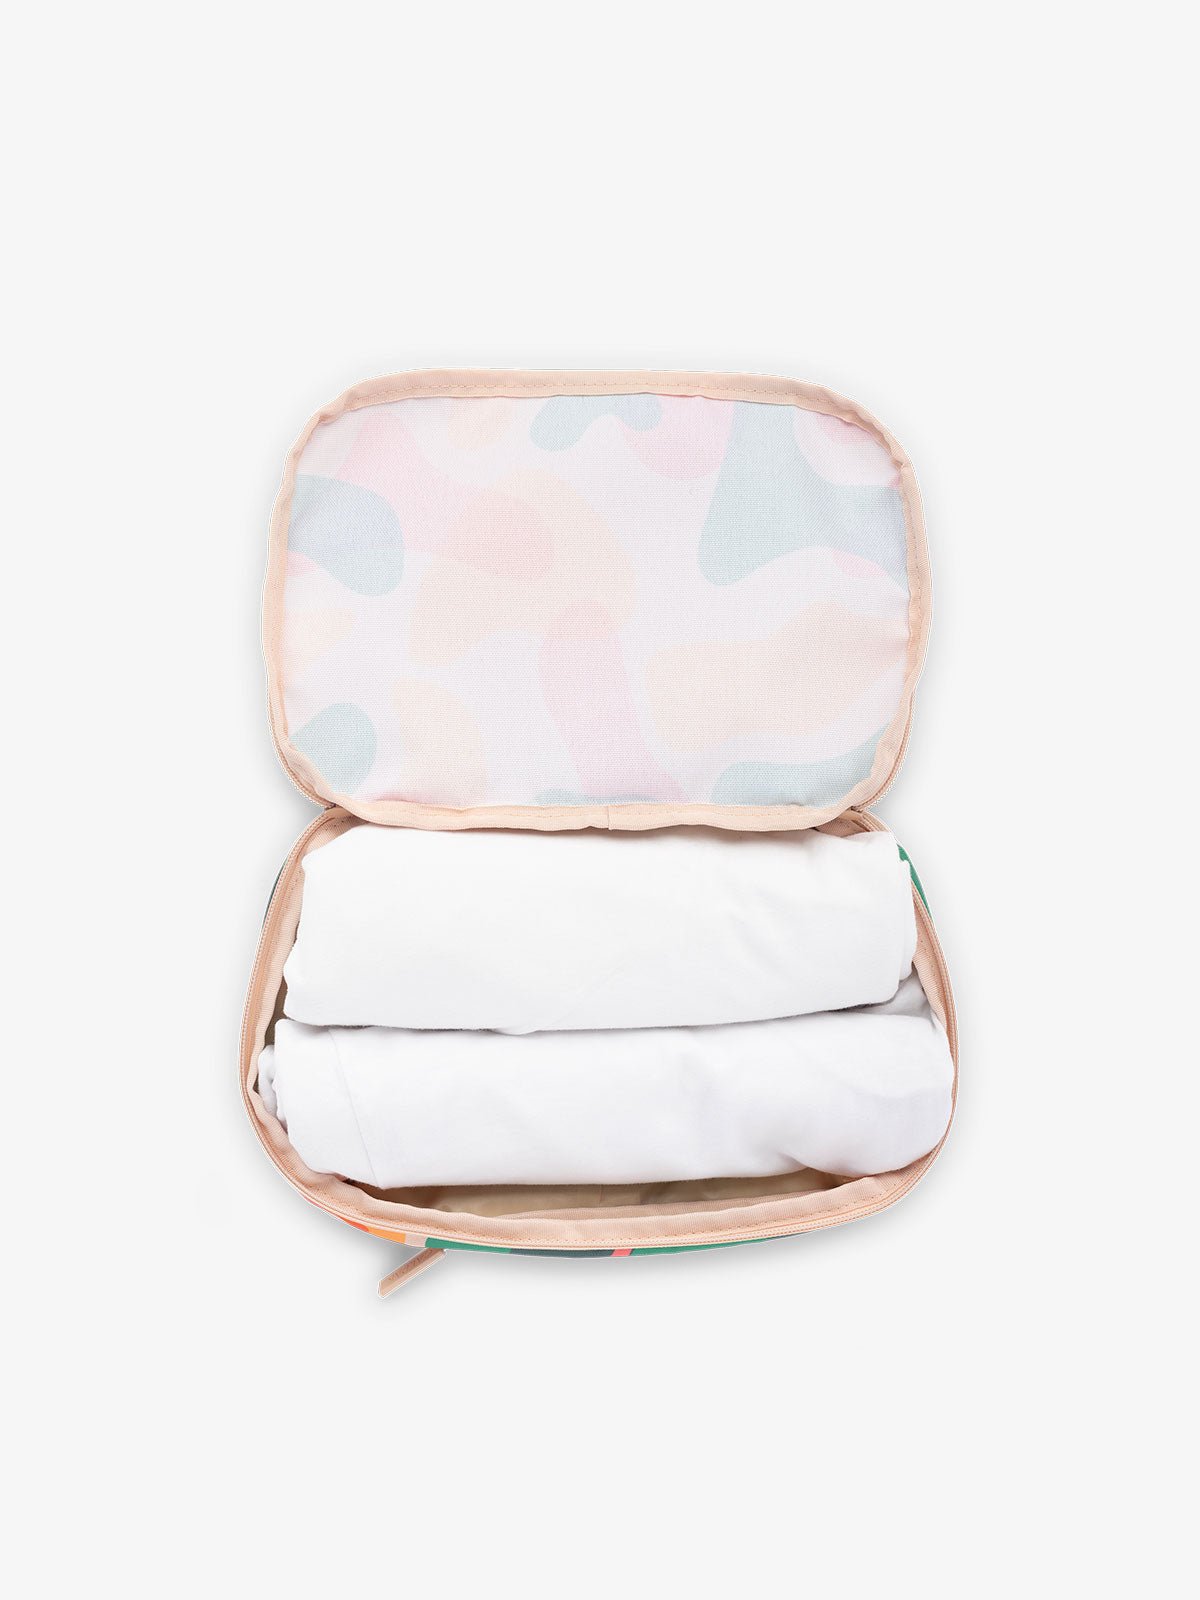 CALPAK small packing cubes for travel made with durable material in modern abstract